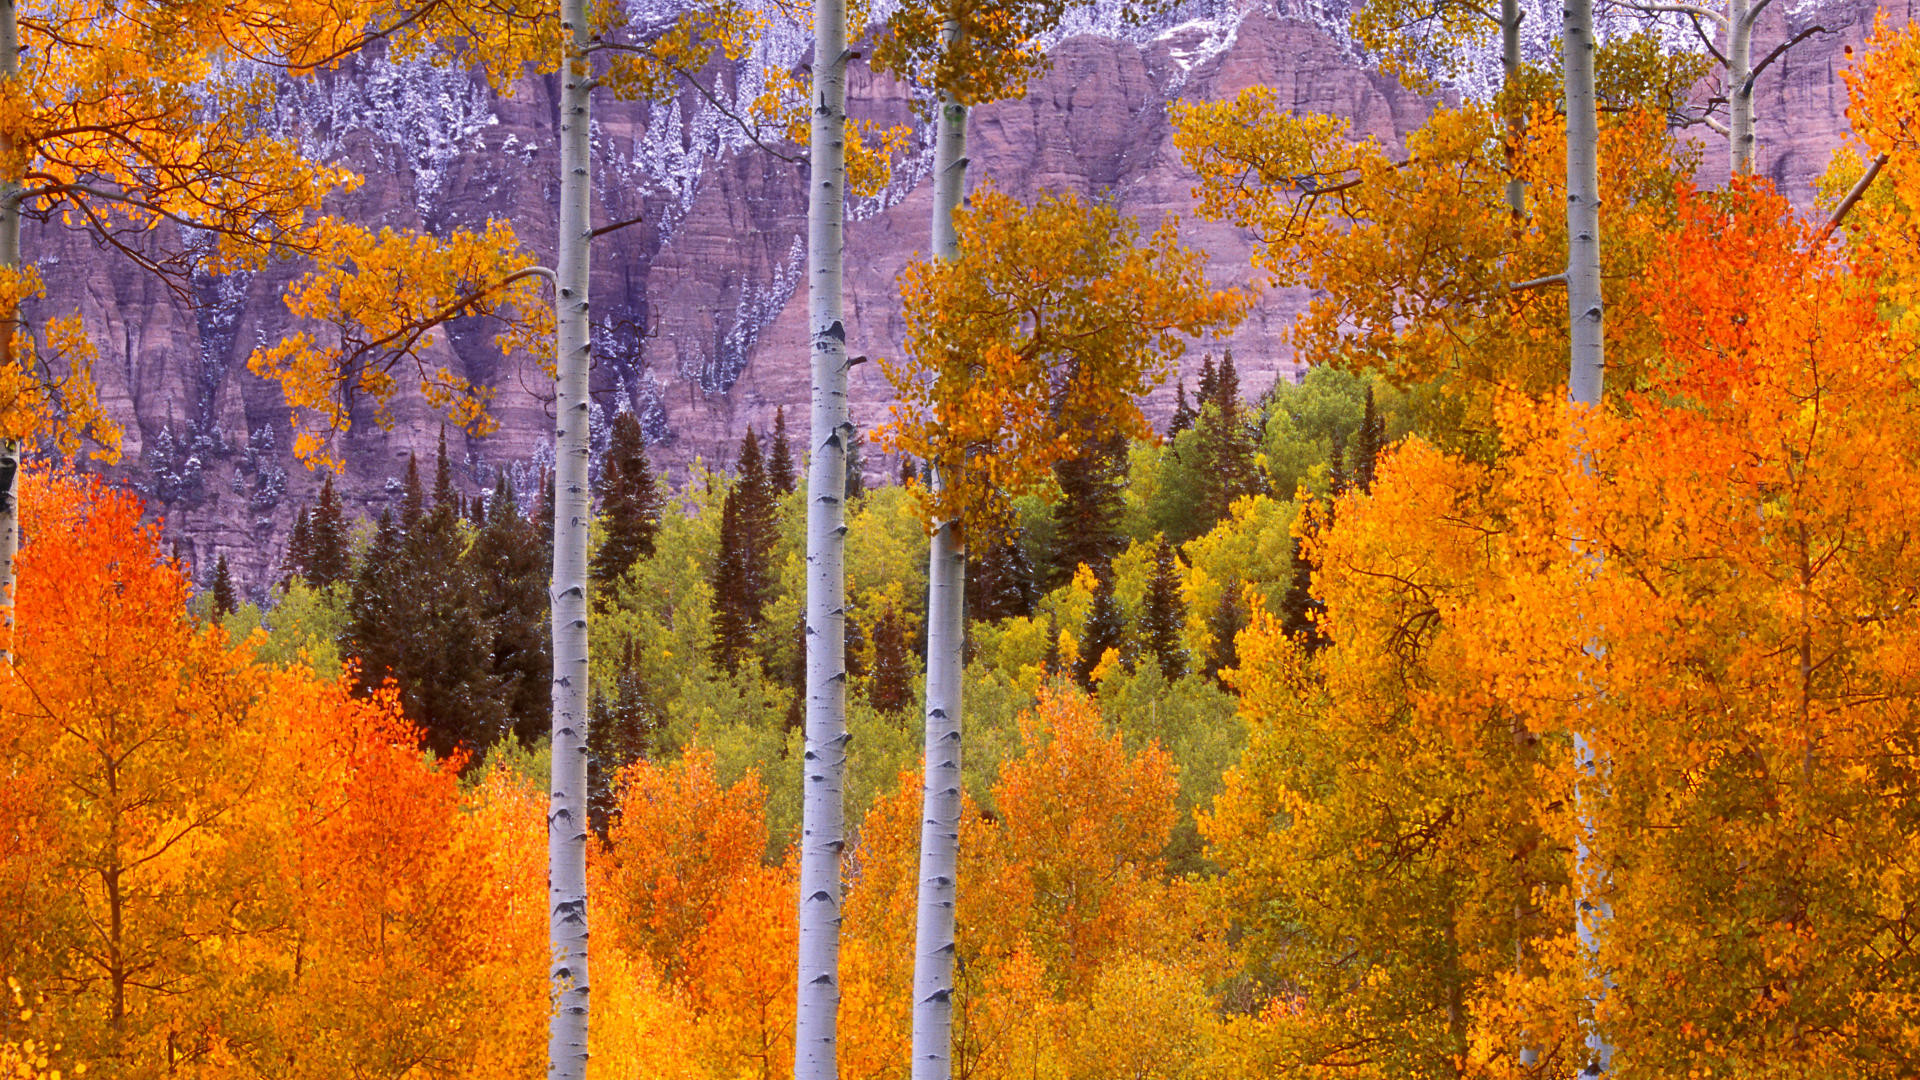 1920x1080 Download Background - Fall Aspens, Cimarron Road, Colorado - Free Cool  Backgrounds and Wallpapers for your Desktop Or Laptop.